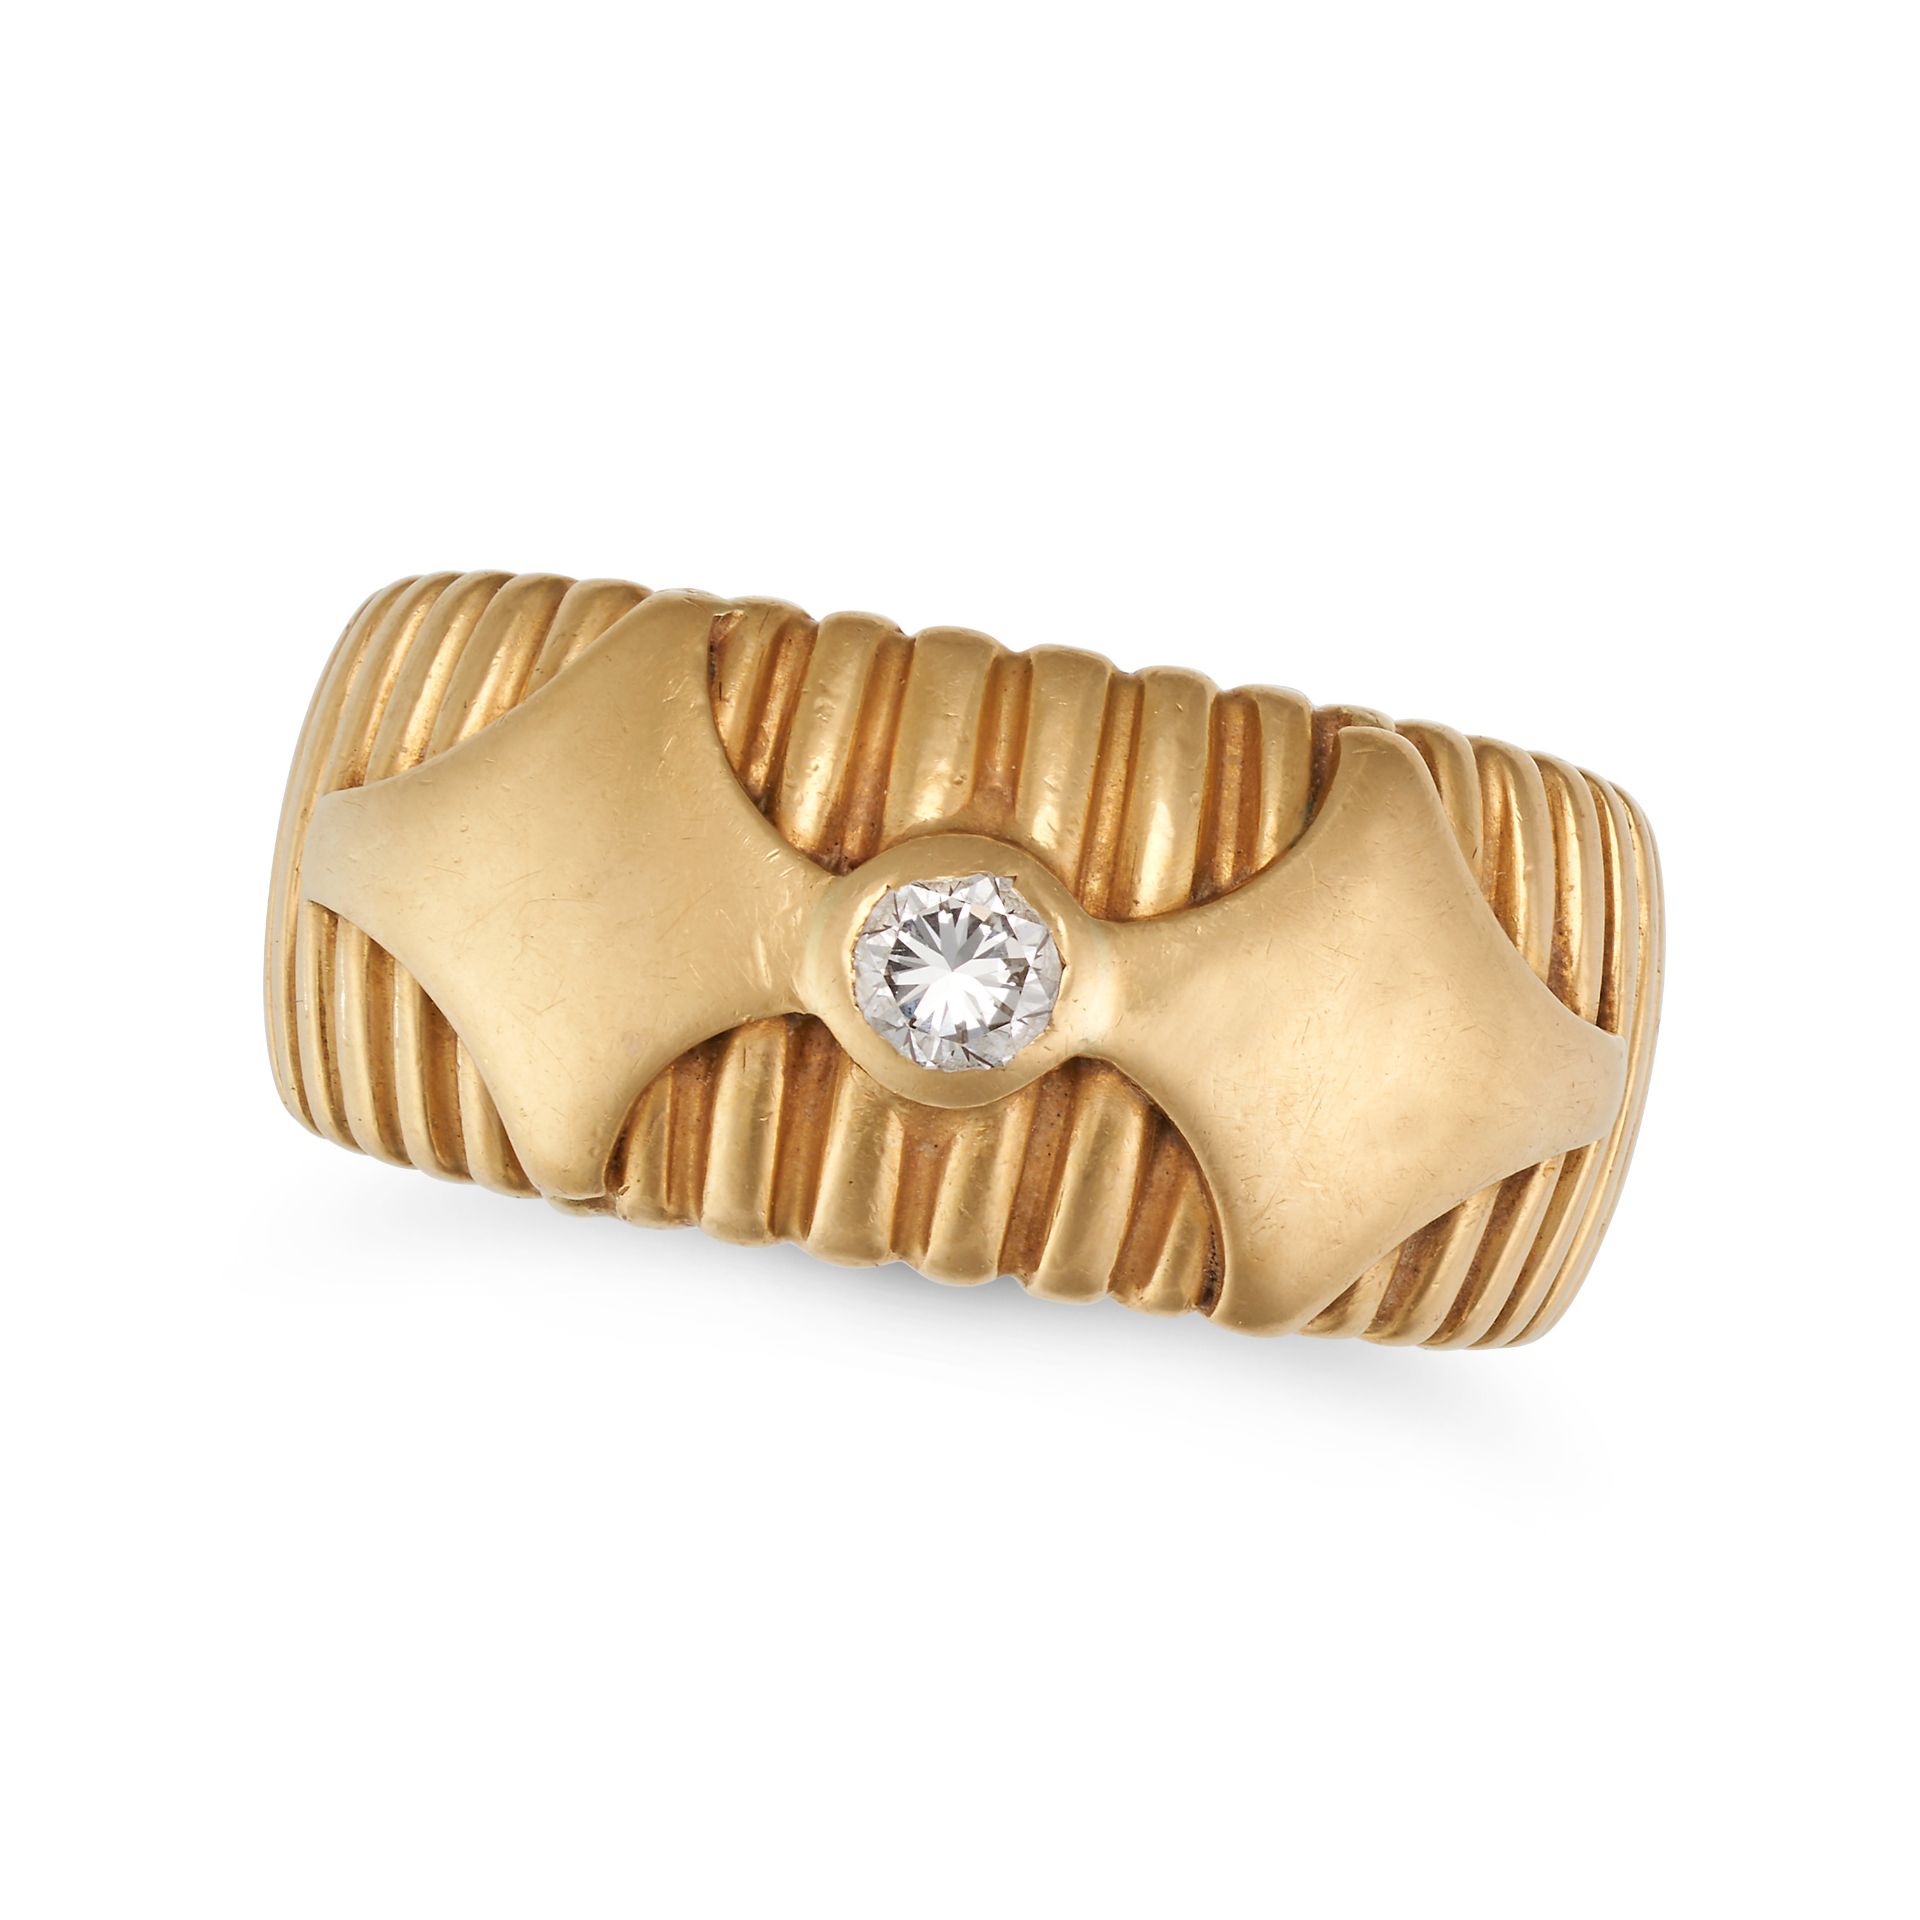 A DIAMOND DRESS RING in 18ct yellow gold, set with a diamond on a thick gold band, no assay marks...